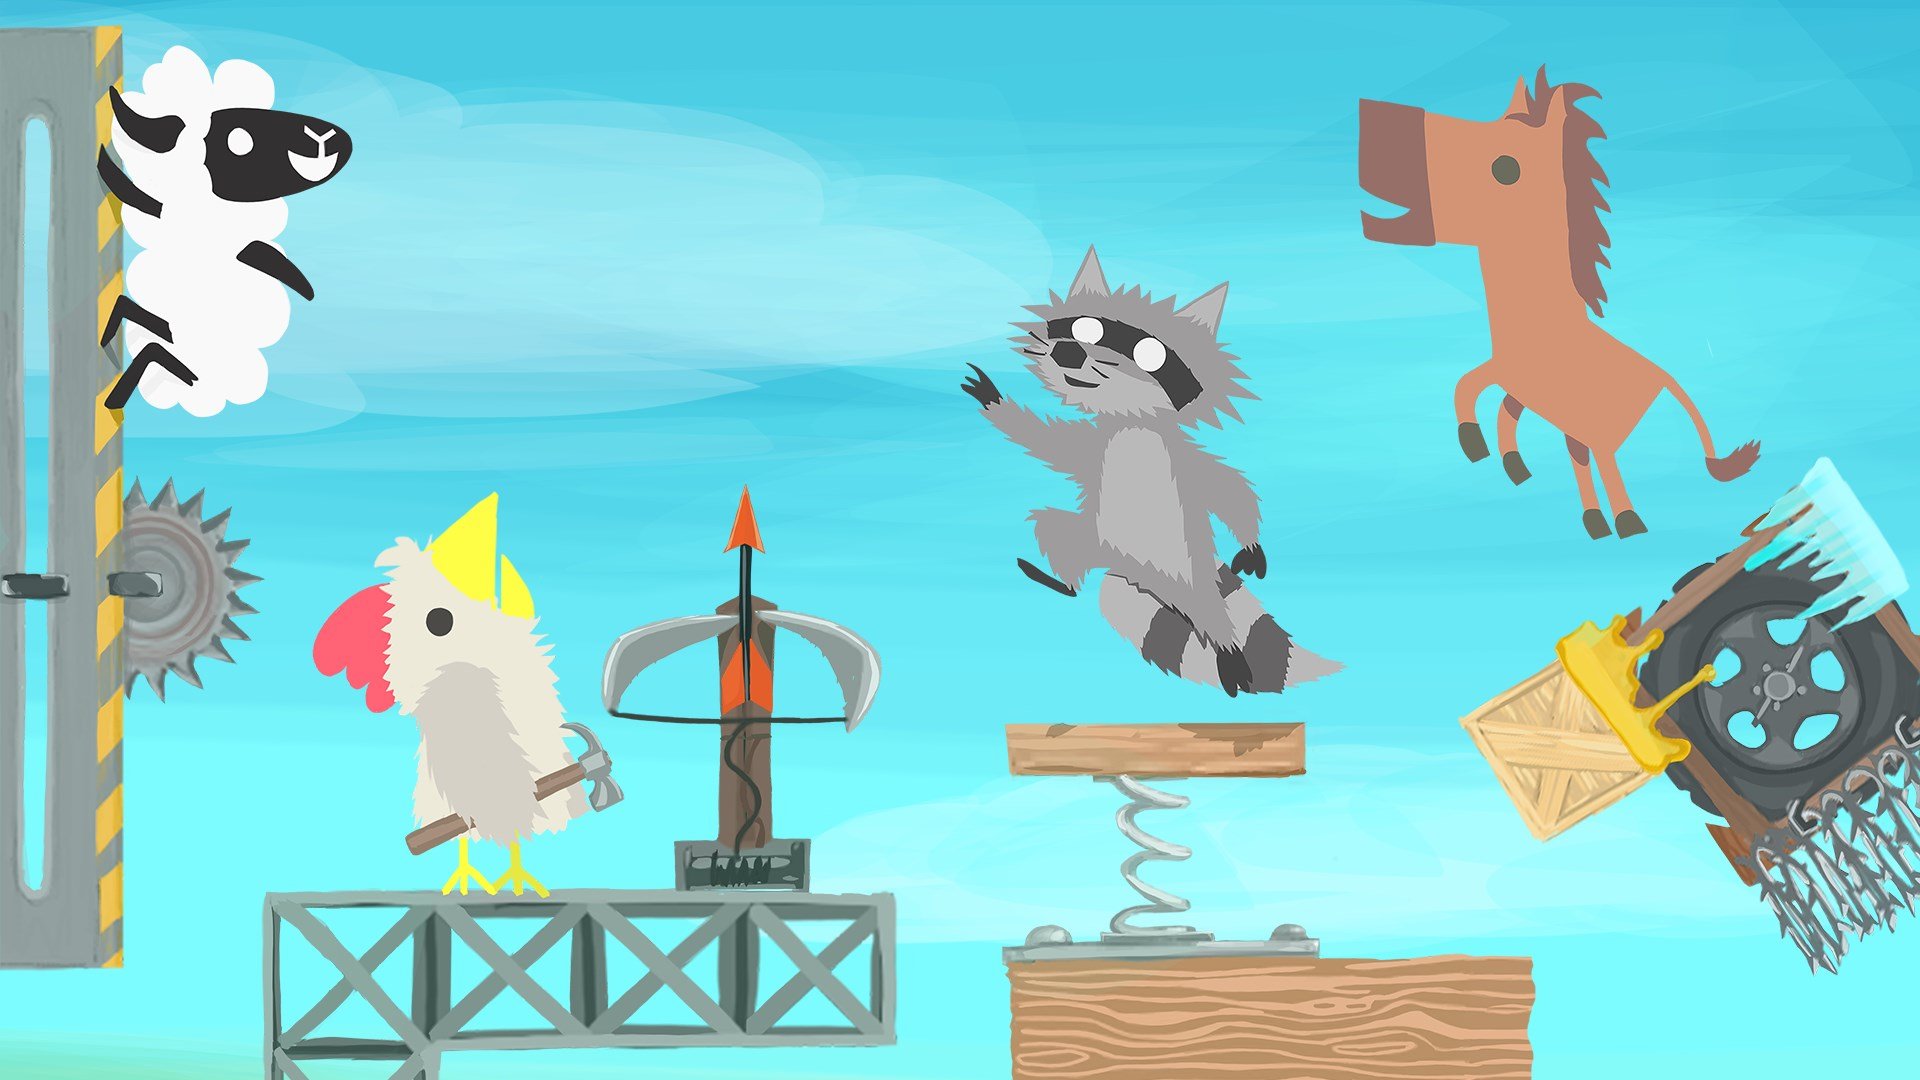 Ultimate Chicken Horse cover image